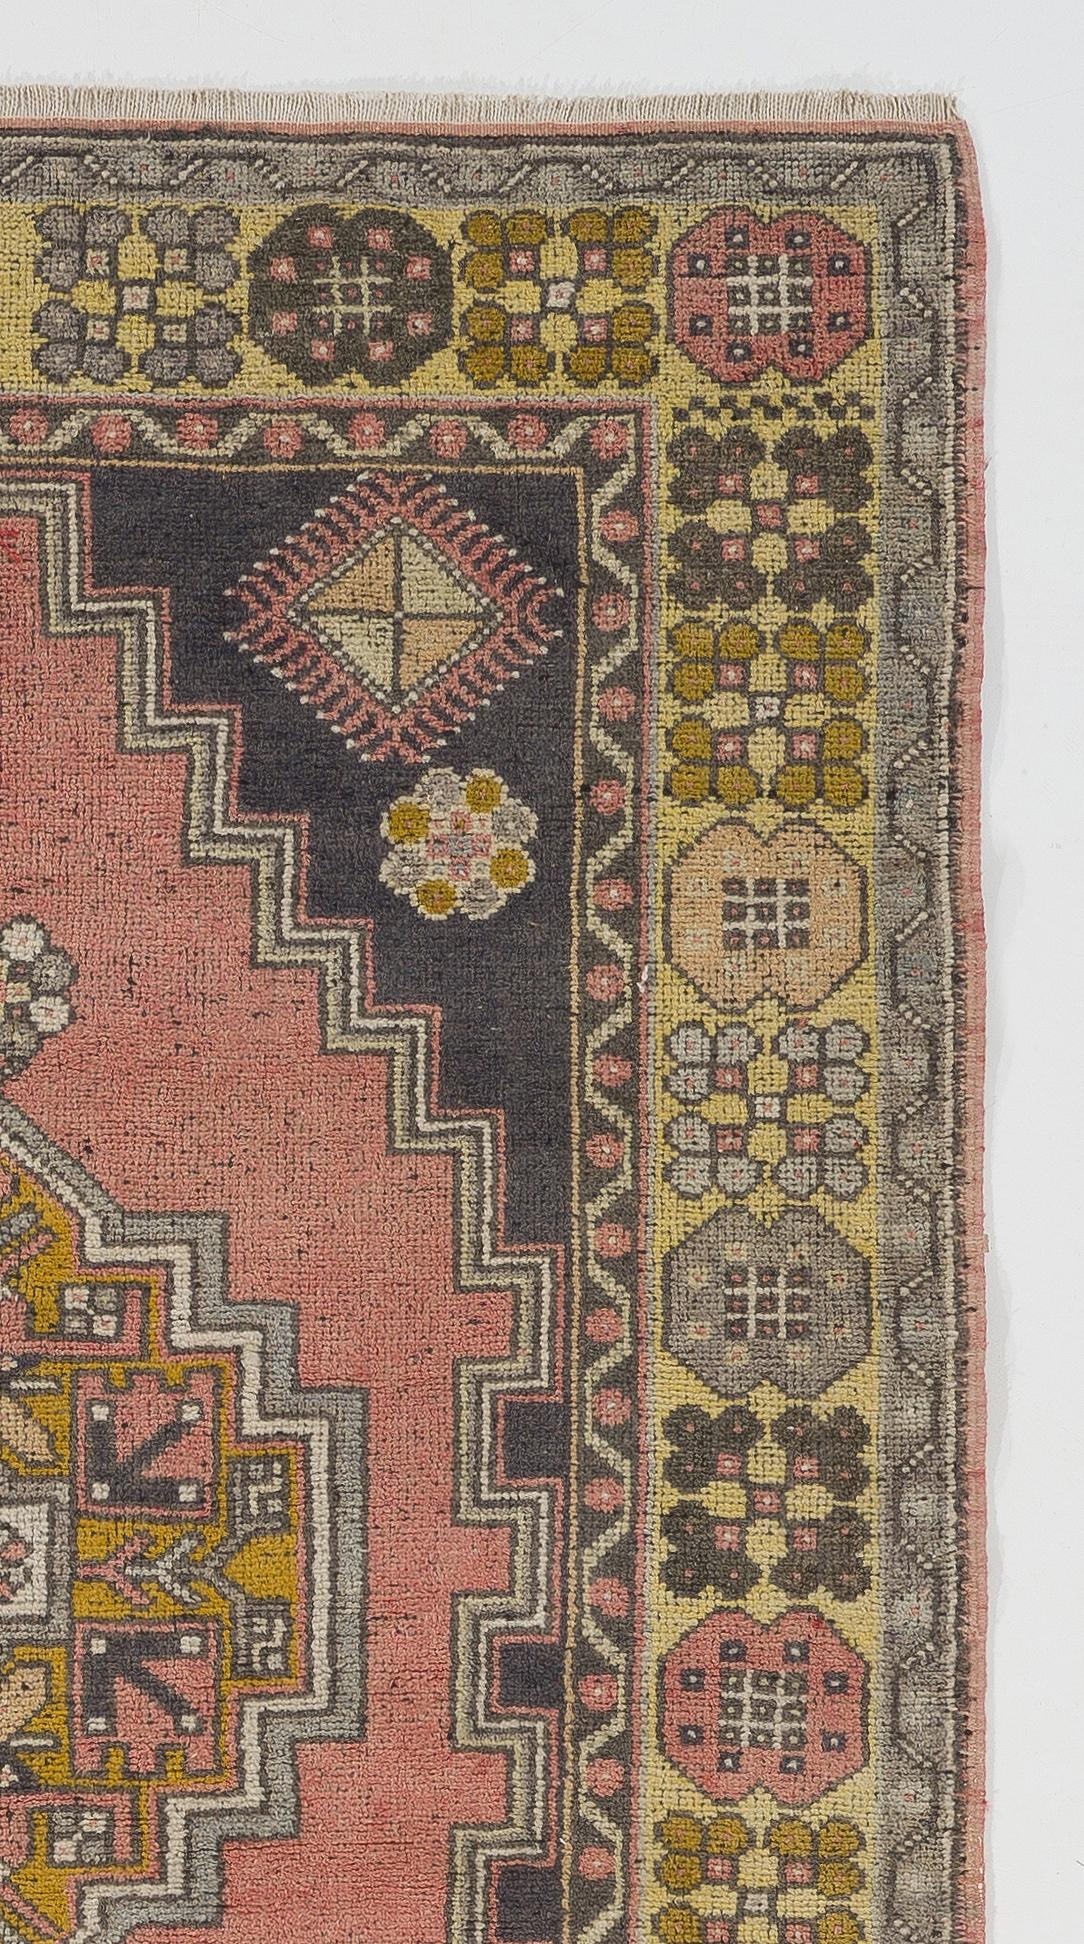 This vintage area rug was hand knotted in Turkey in the 1950s. It features a geometric medallion at the centre of two nested lozenge-shaped areas within a field in faded red and faded black colors featuring tassel-like motifs on their borders. The